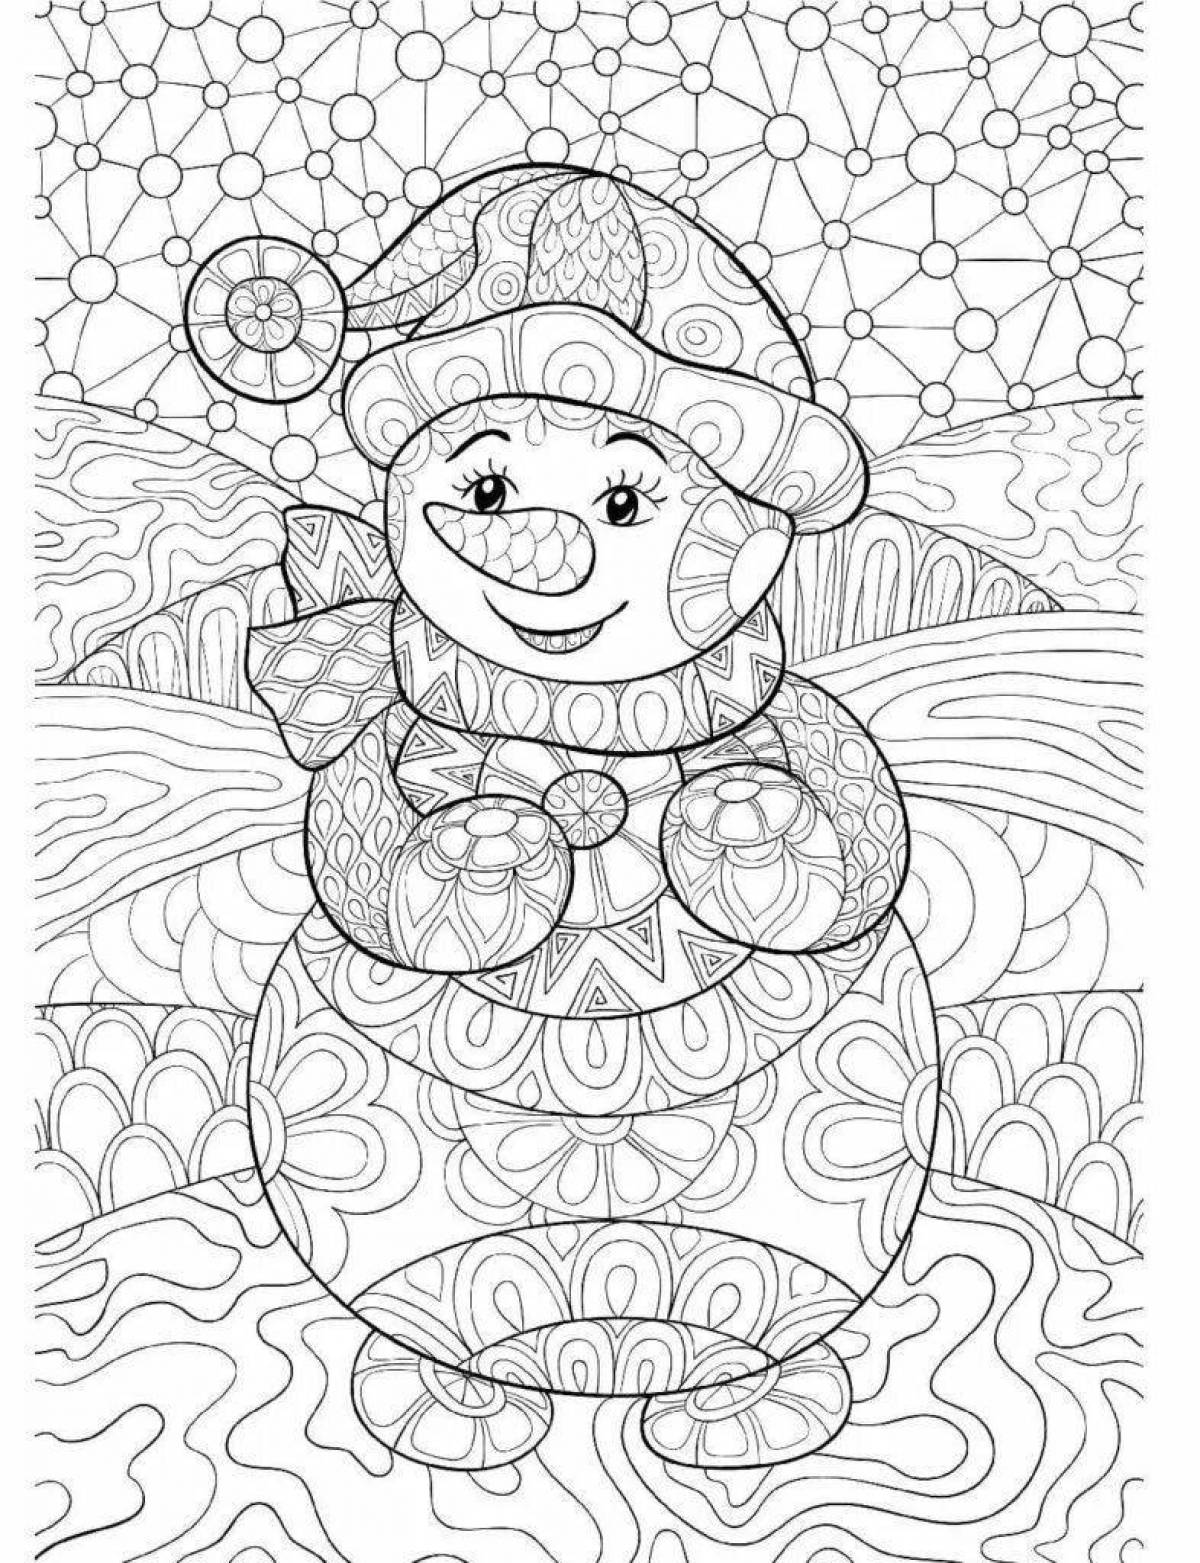 Famous winter coloring book for adults